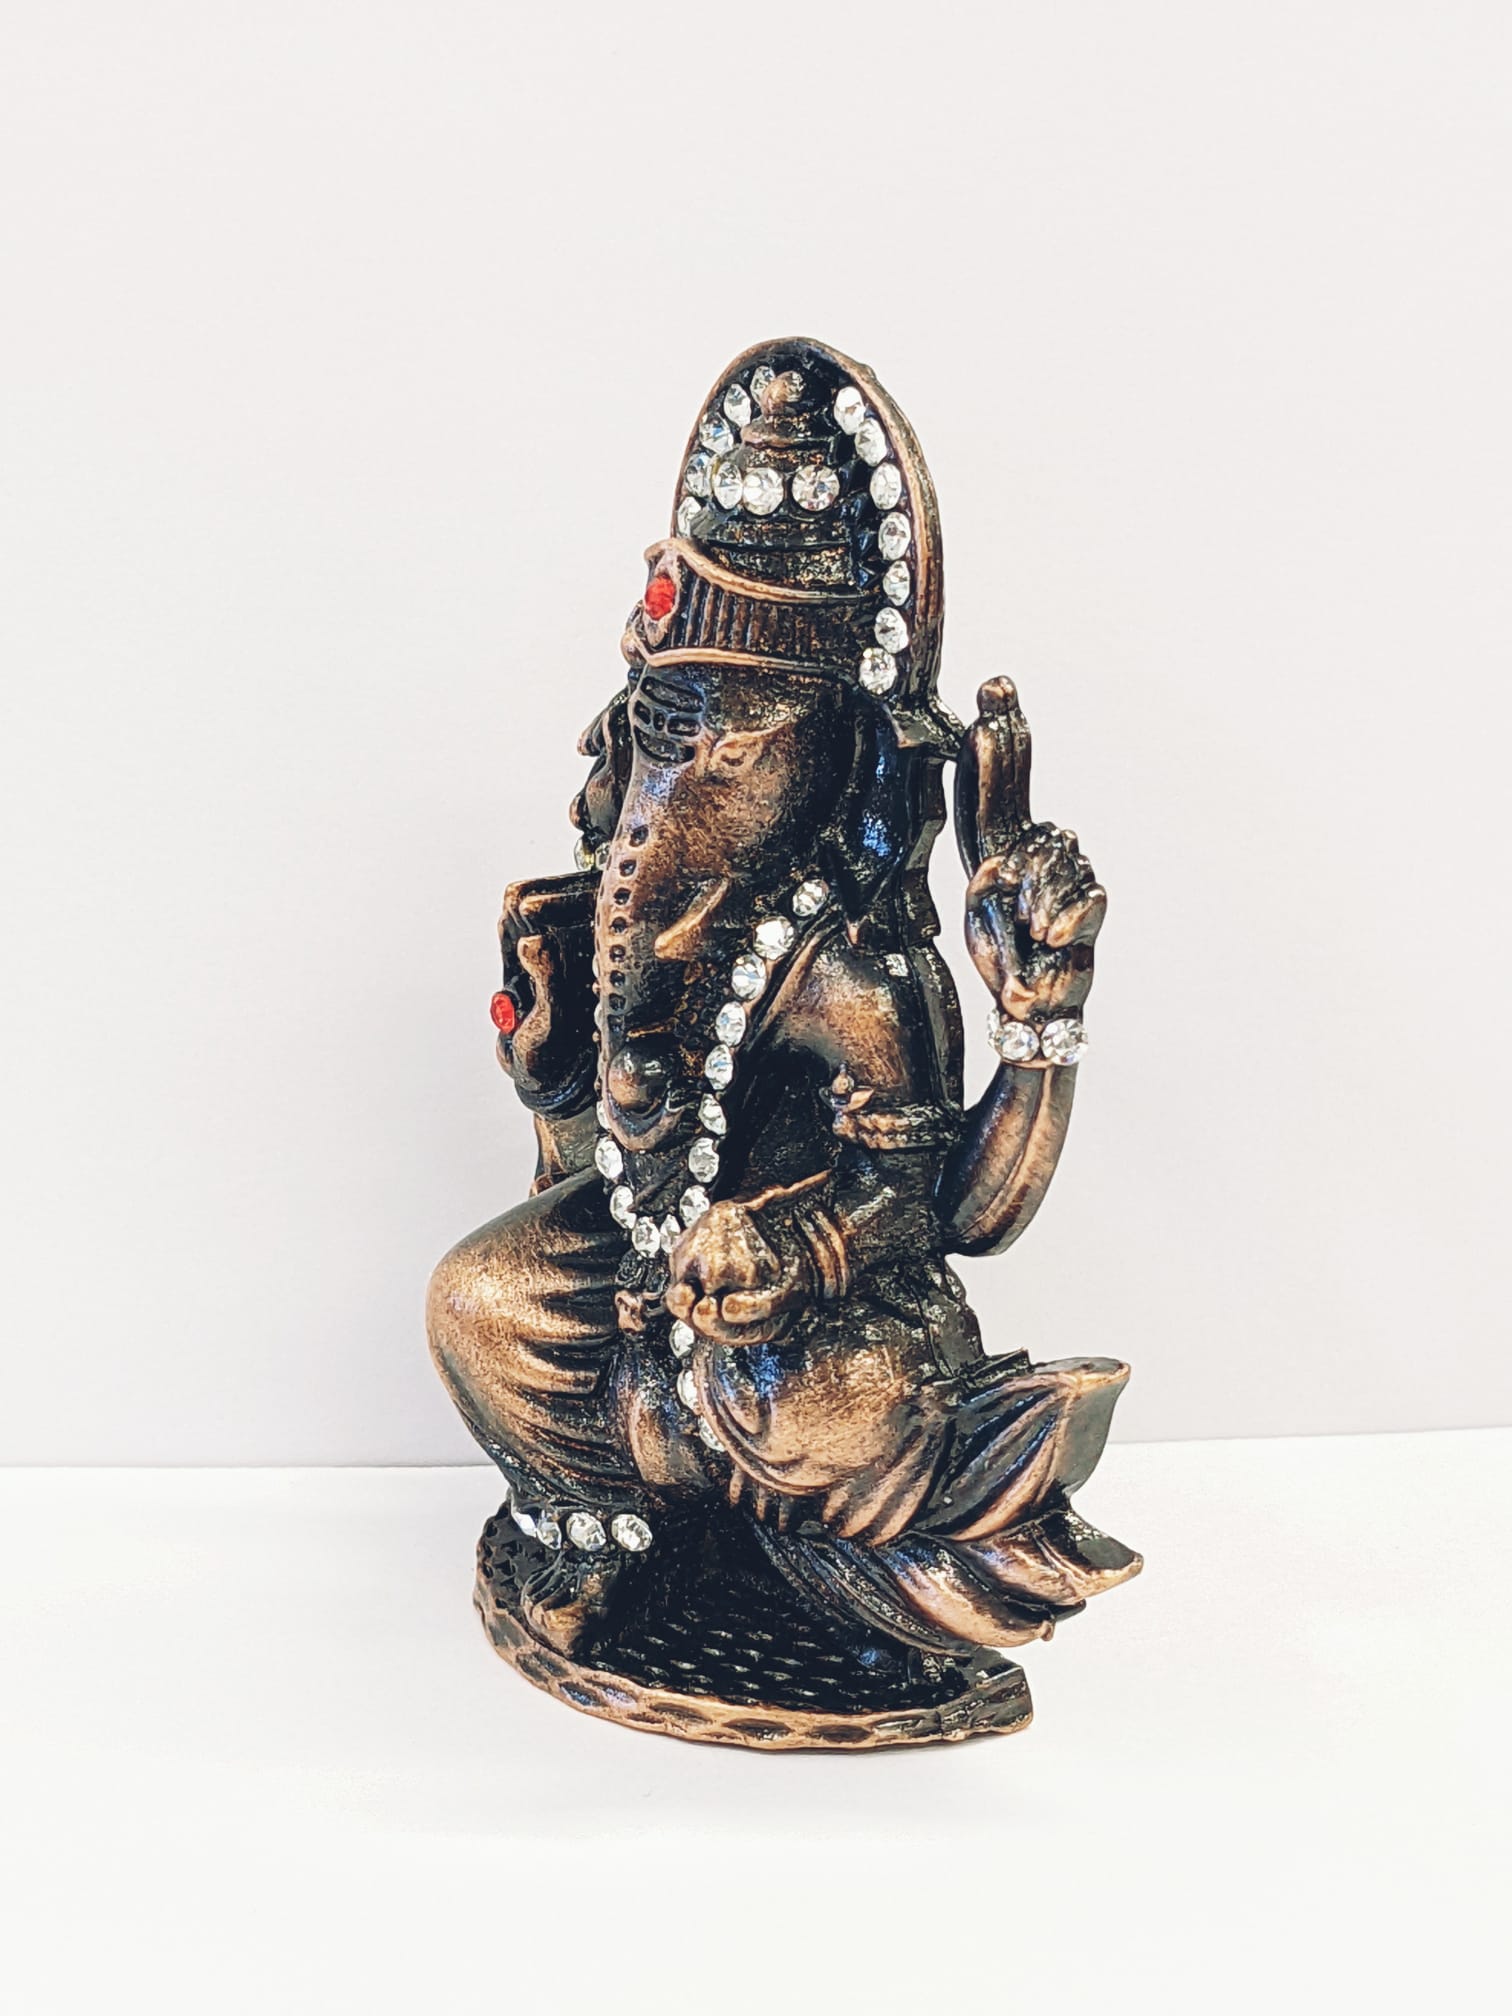 Image of a copper shaded Car dashboard Idol of Lord Ganesha with stone work